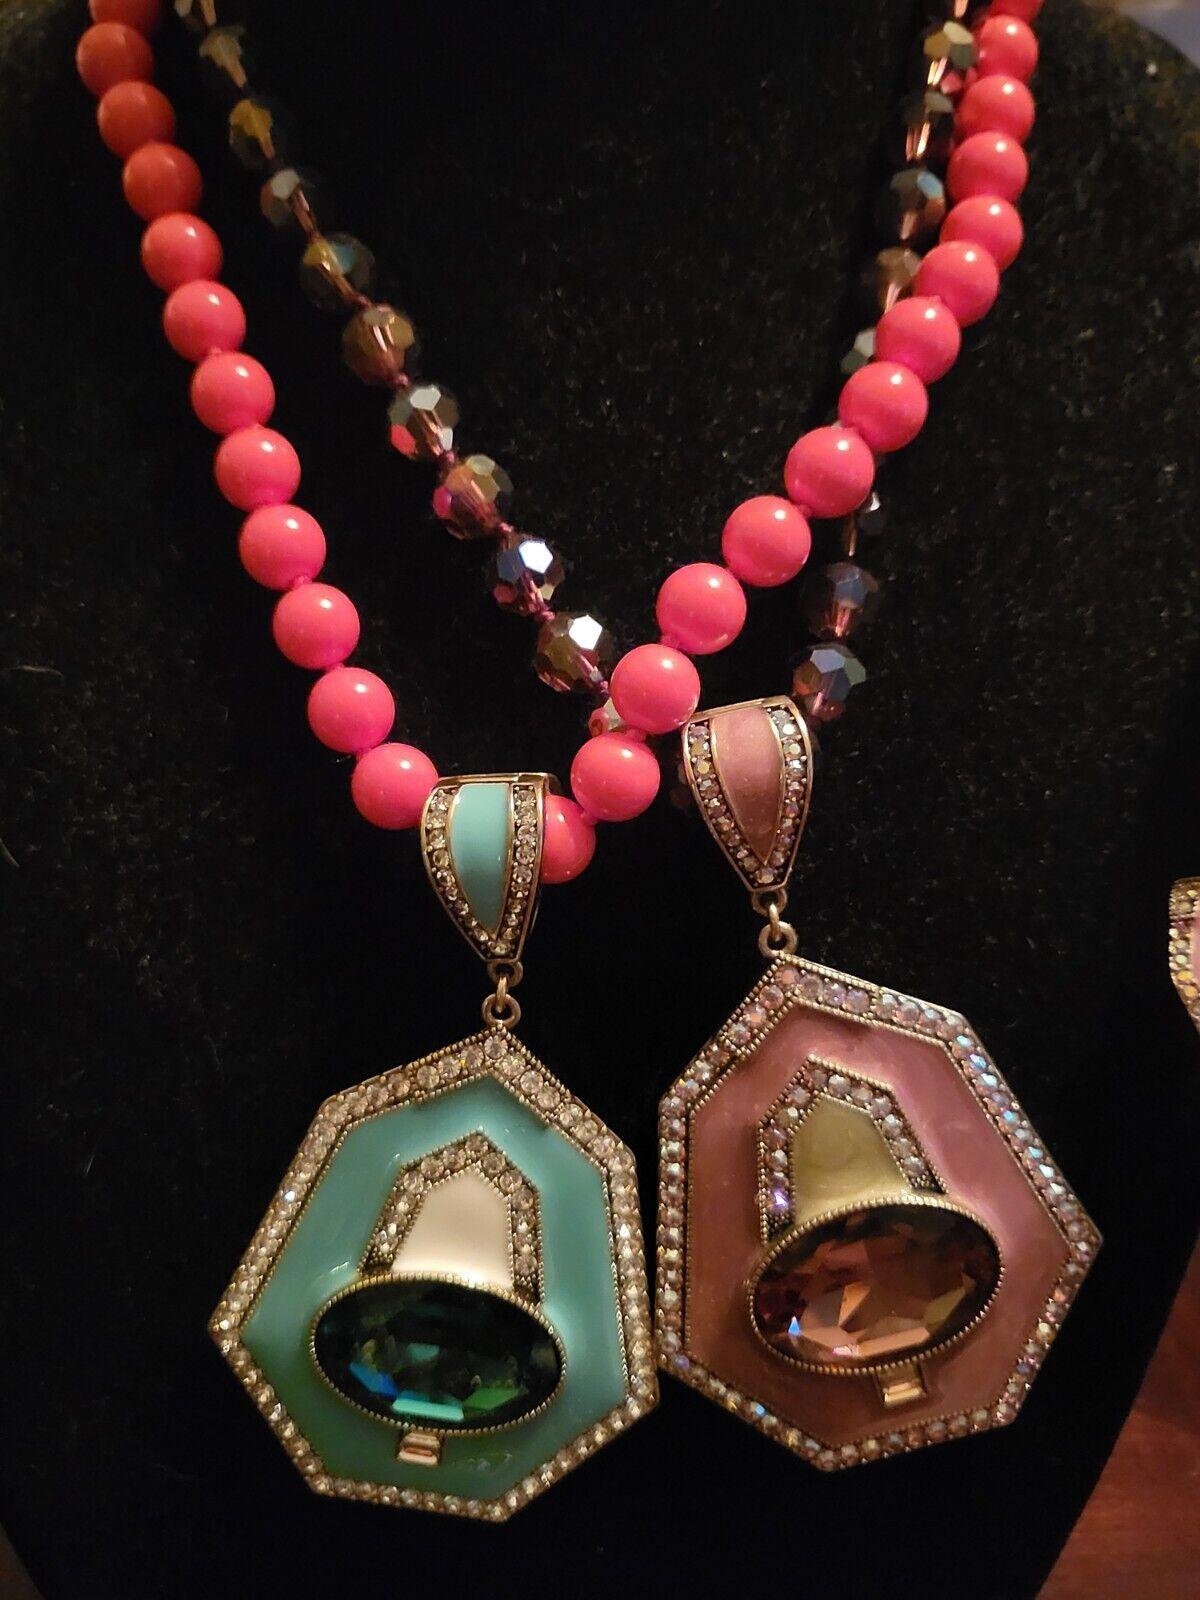 Simply Beautiful! Signed HEIDI DAUS Designer Vintage Enamel and Sparkling Crystal Pendant Necklaces and Clip Earrings. One set is Turquoise enamel with a faux Coral Beads Necklace. The other a Beautiful Mauve/soft Pink shade with an Aurora Borealis